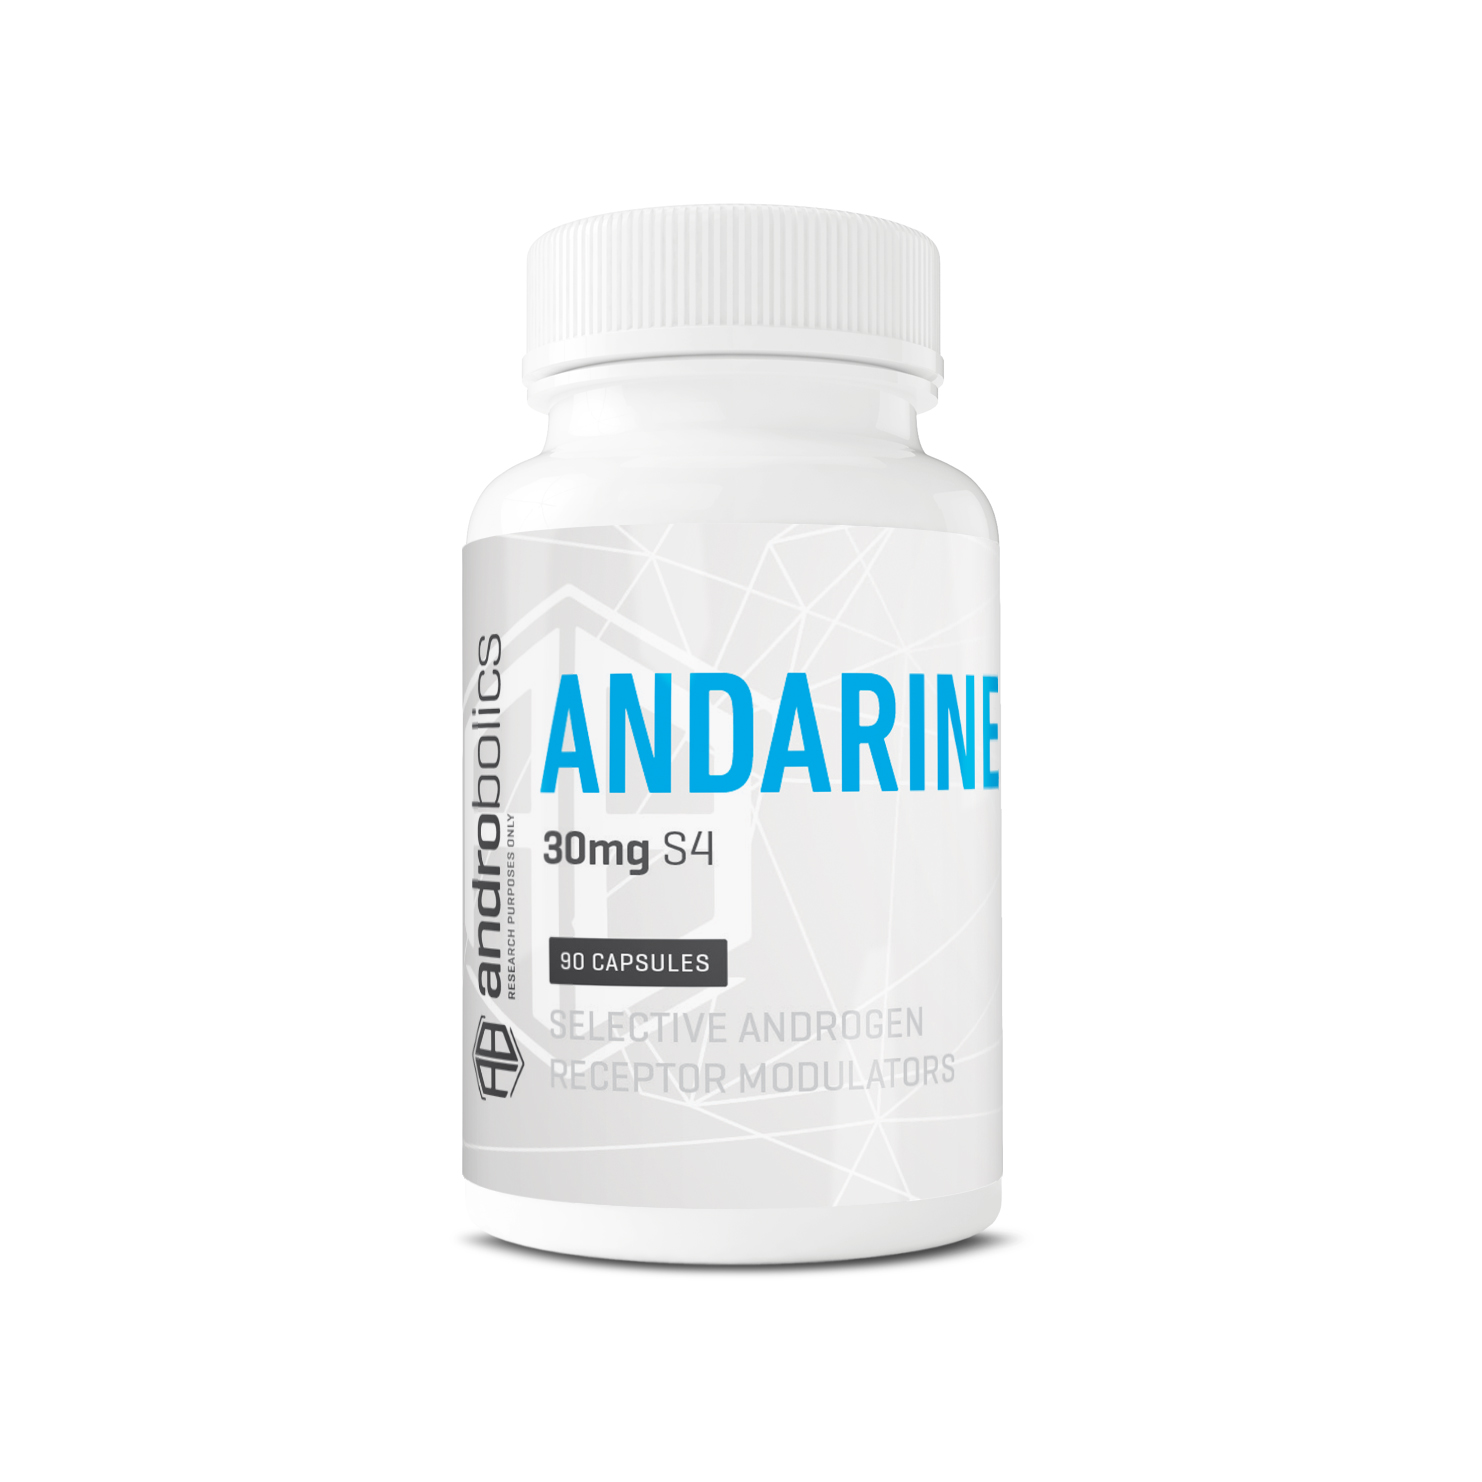 Andarine S4 Canada - Bottle of Andarine S4 with 90 capsules of 30mg